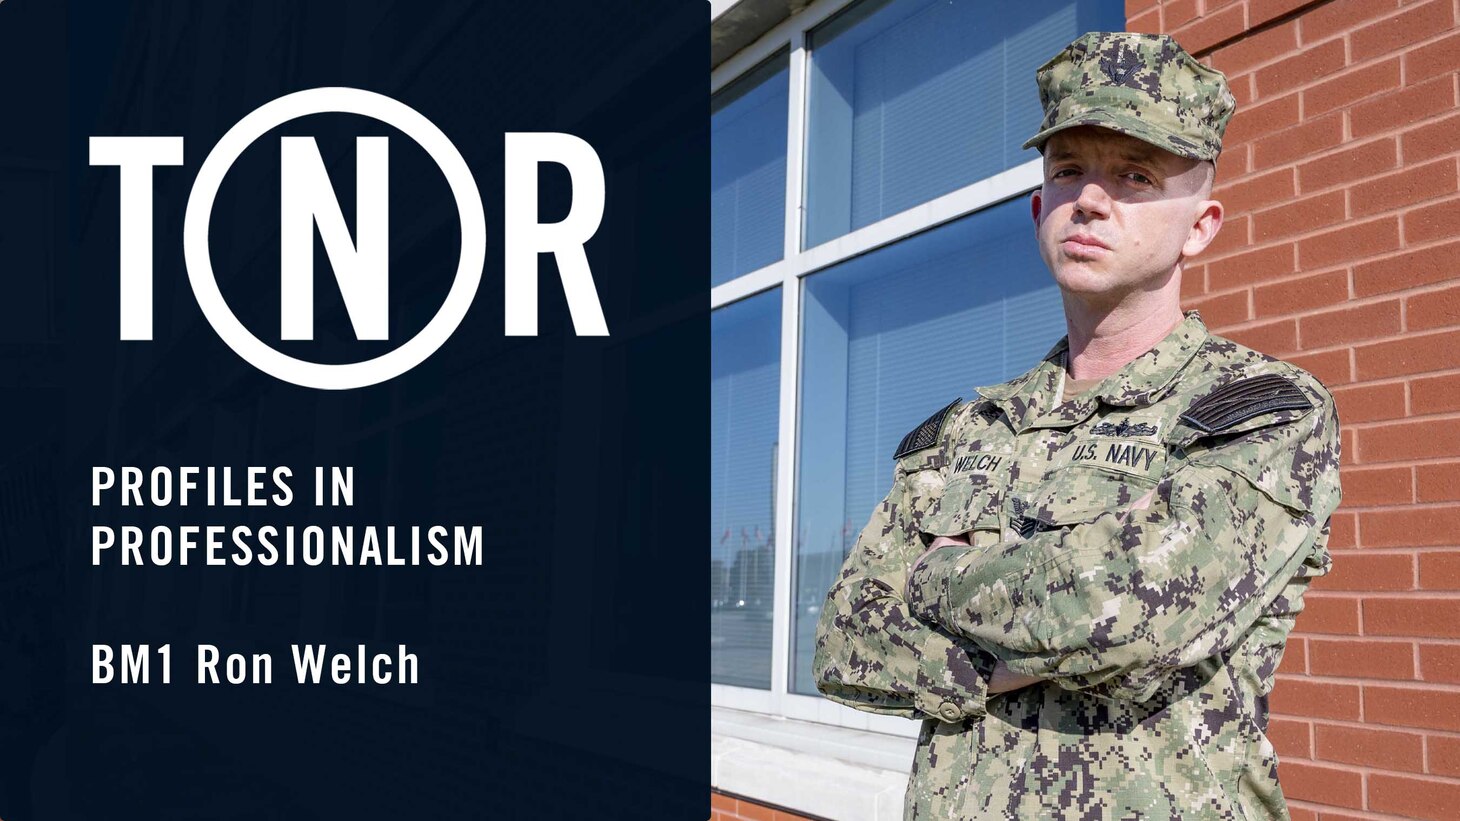 In 2019, Boatswain’s Mate 1st Class Ron Welch had been an active-duty Sailor for 10 years and was looking for a change. He still wanted to be in the Navy, but felt he had unfinished business on the civilian side.